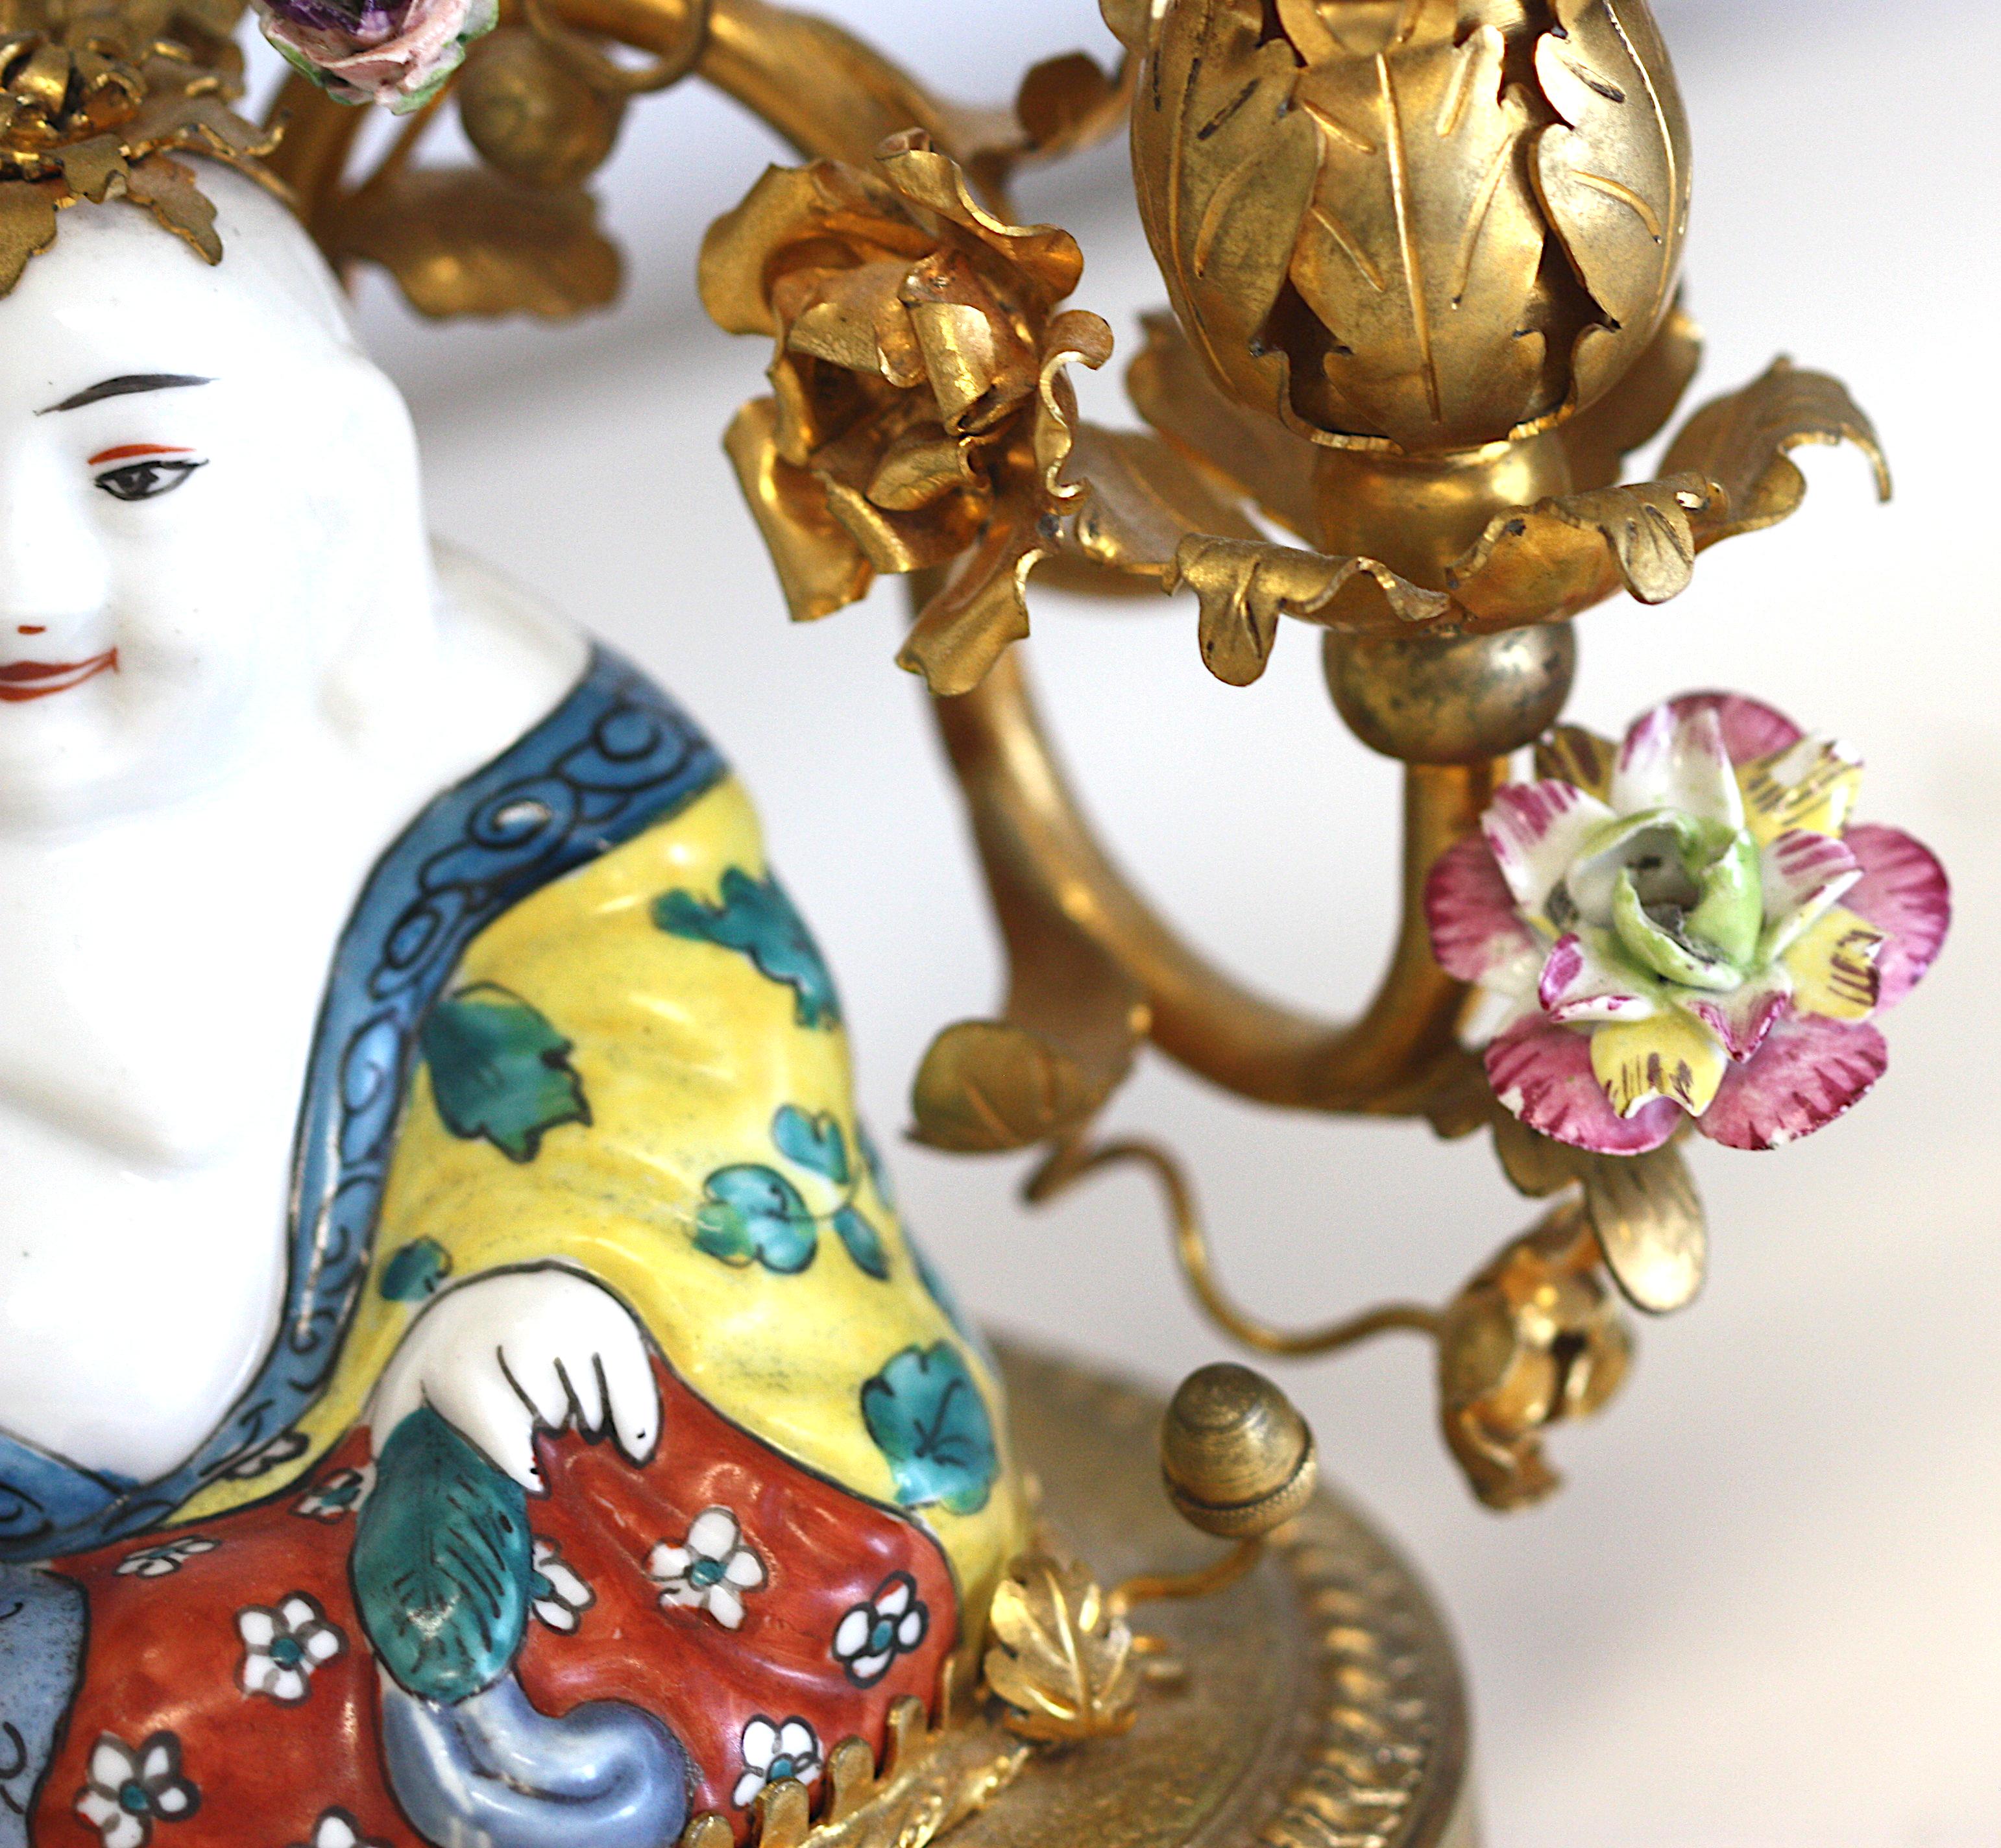 
Louis XV Style Porcelain Mtd. Gilt Bronze Two-Light Lamp
Composed of a porcelain seated Buddha, before two gilt bronze scrolling leafy candle arms, dotted with porcelain flowers, on an oval bronze base. 
Height overall, 23 in. (58.42 cm.), Width 11